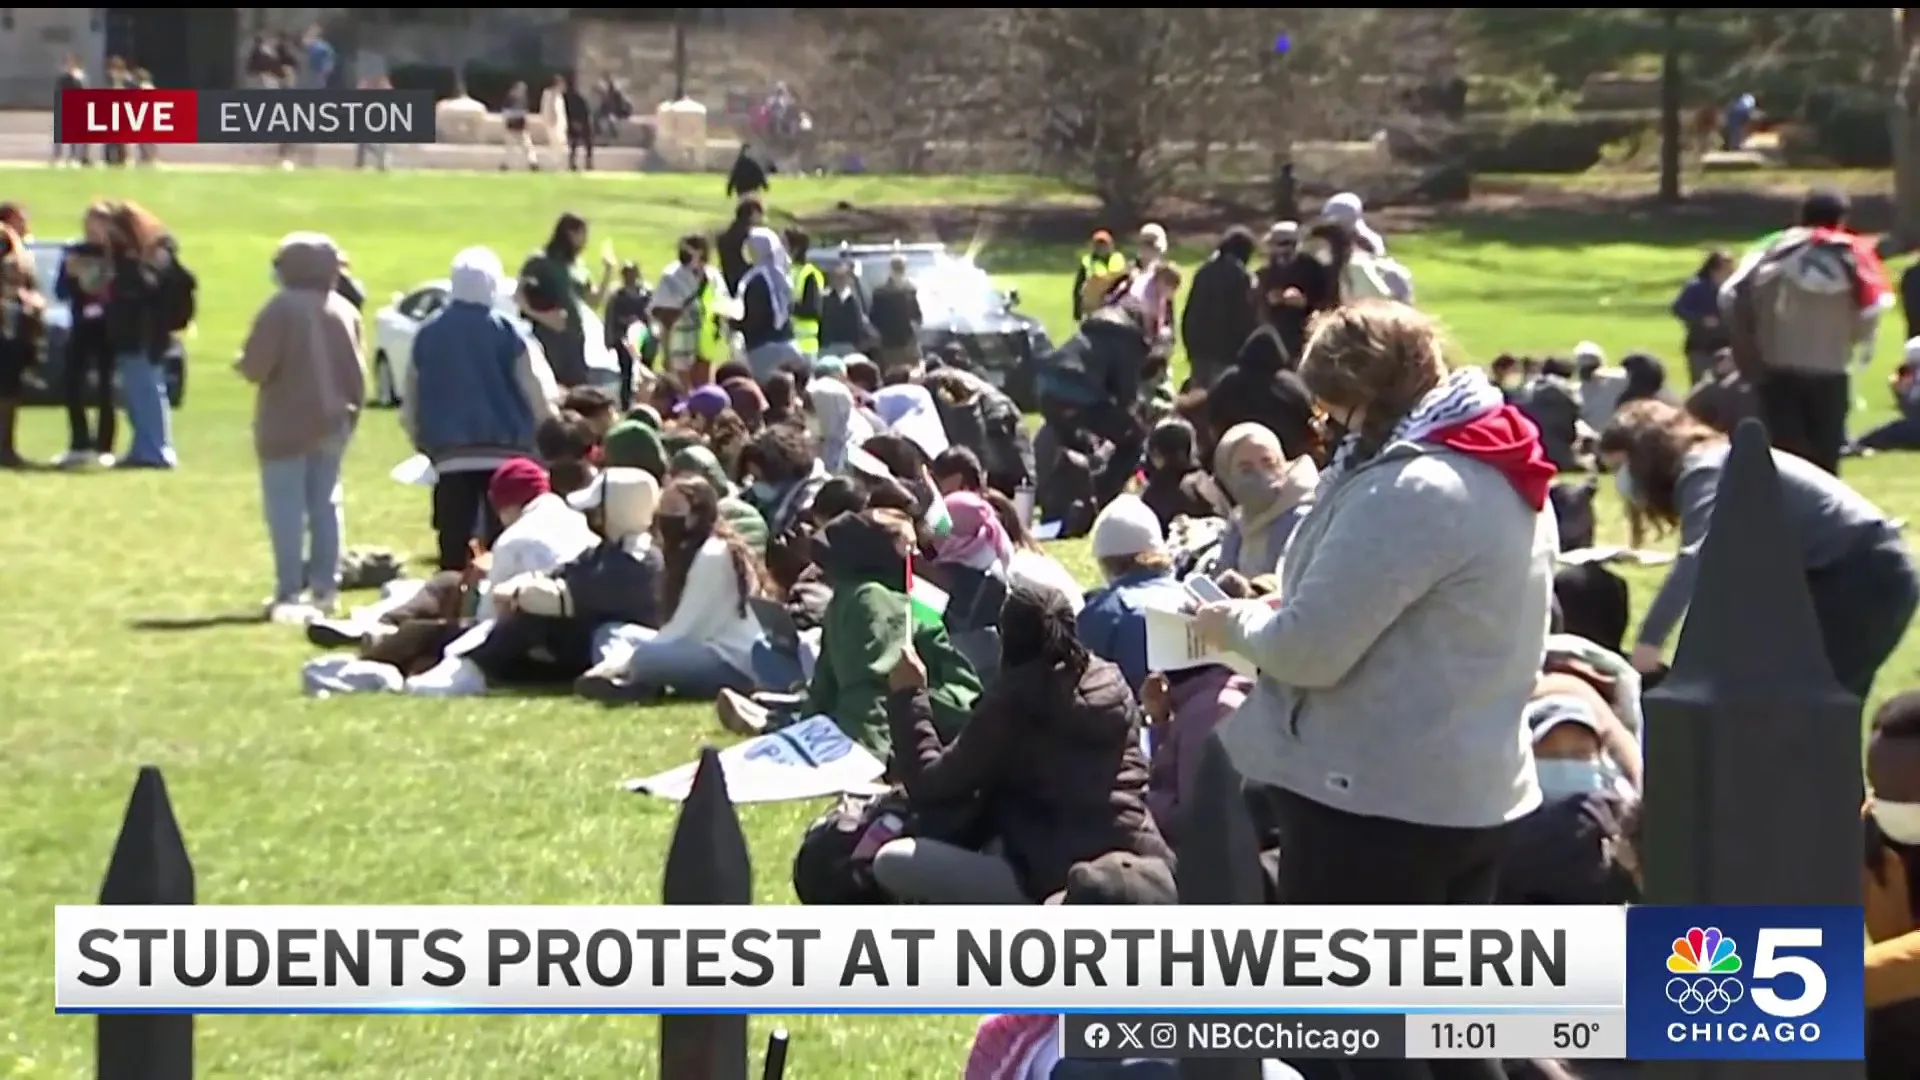 Campus Protest Over Israel-Hamas Conflict Sparks Tensions at Northwestern University